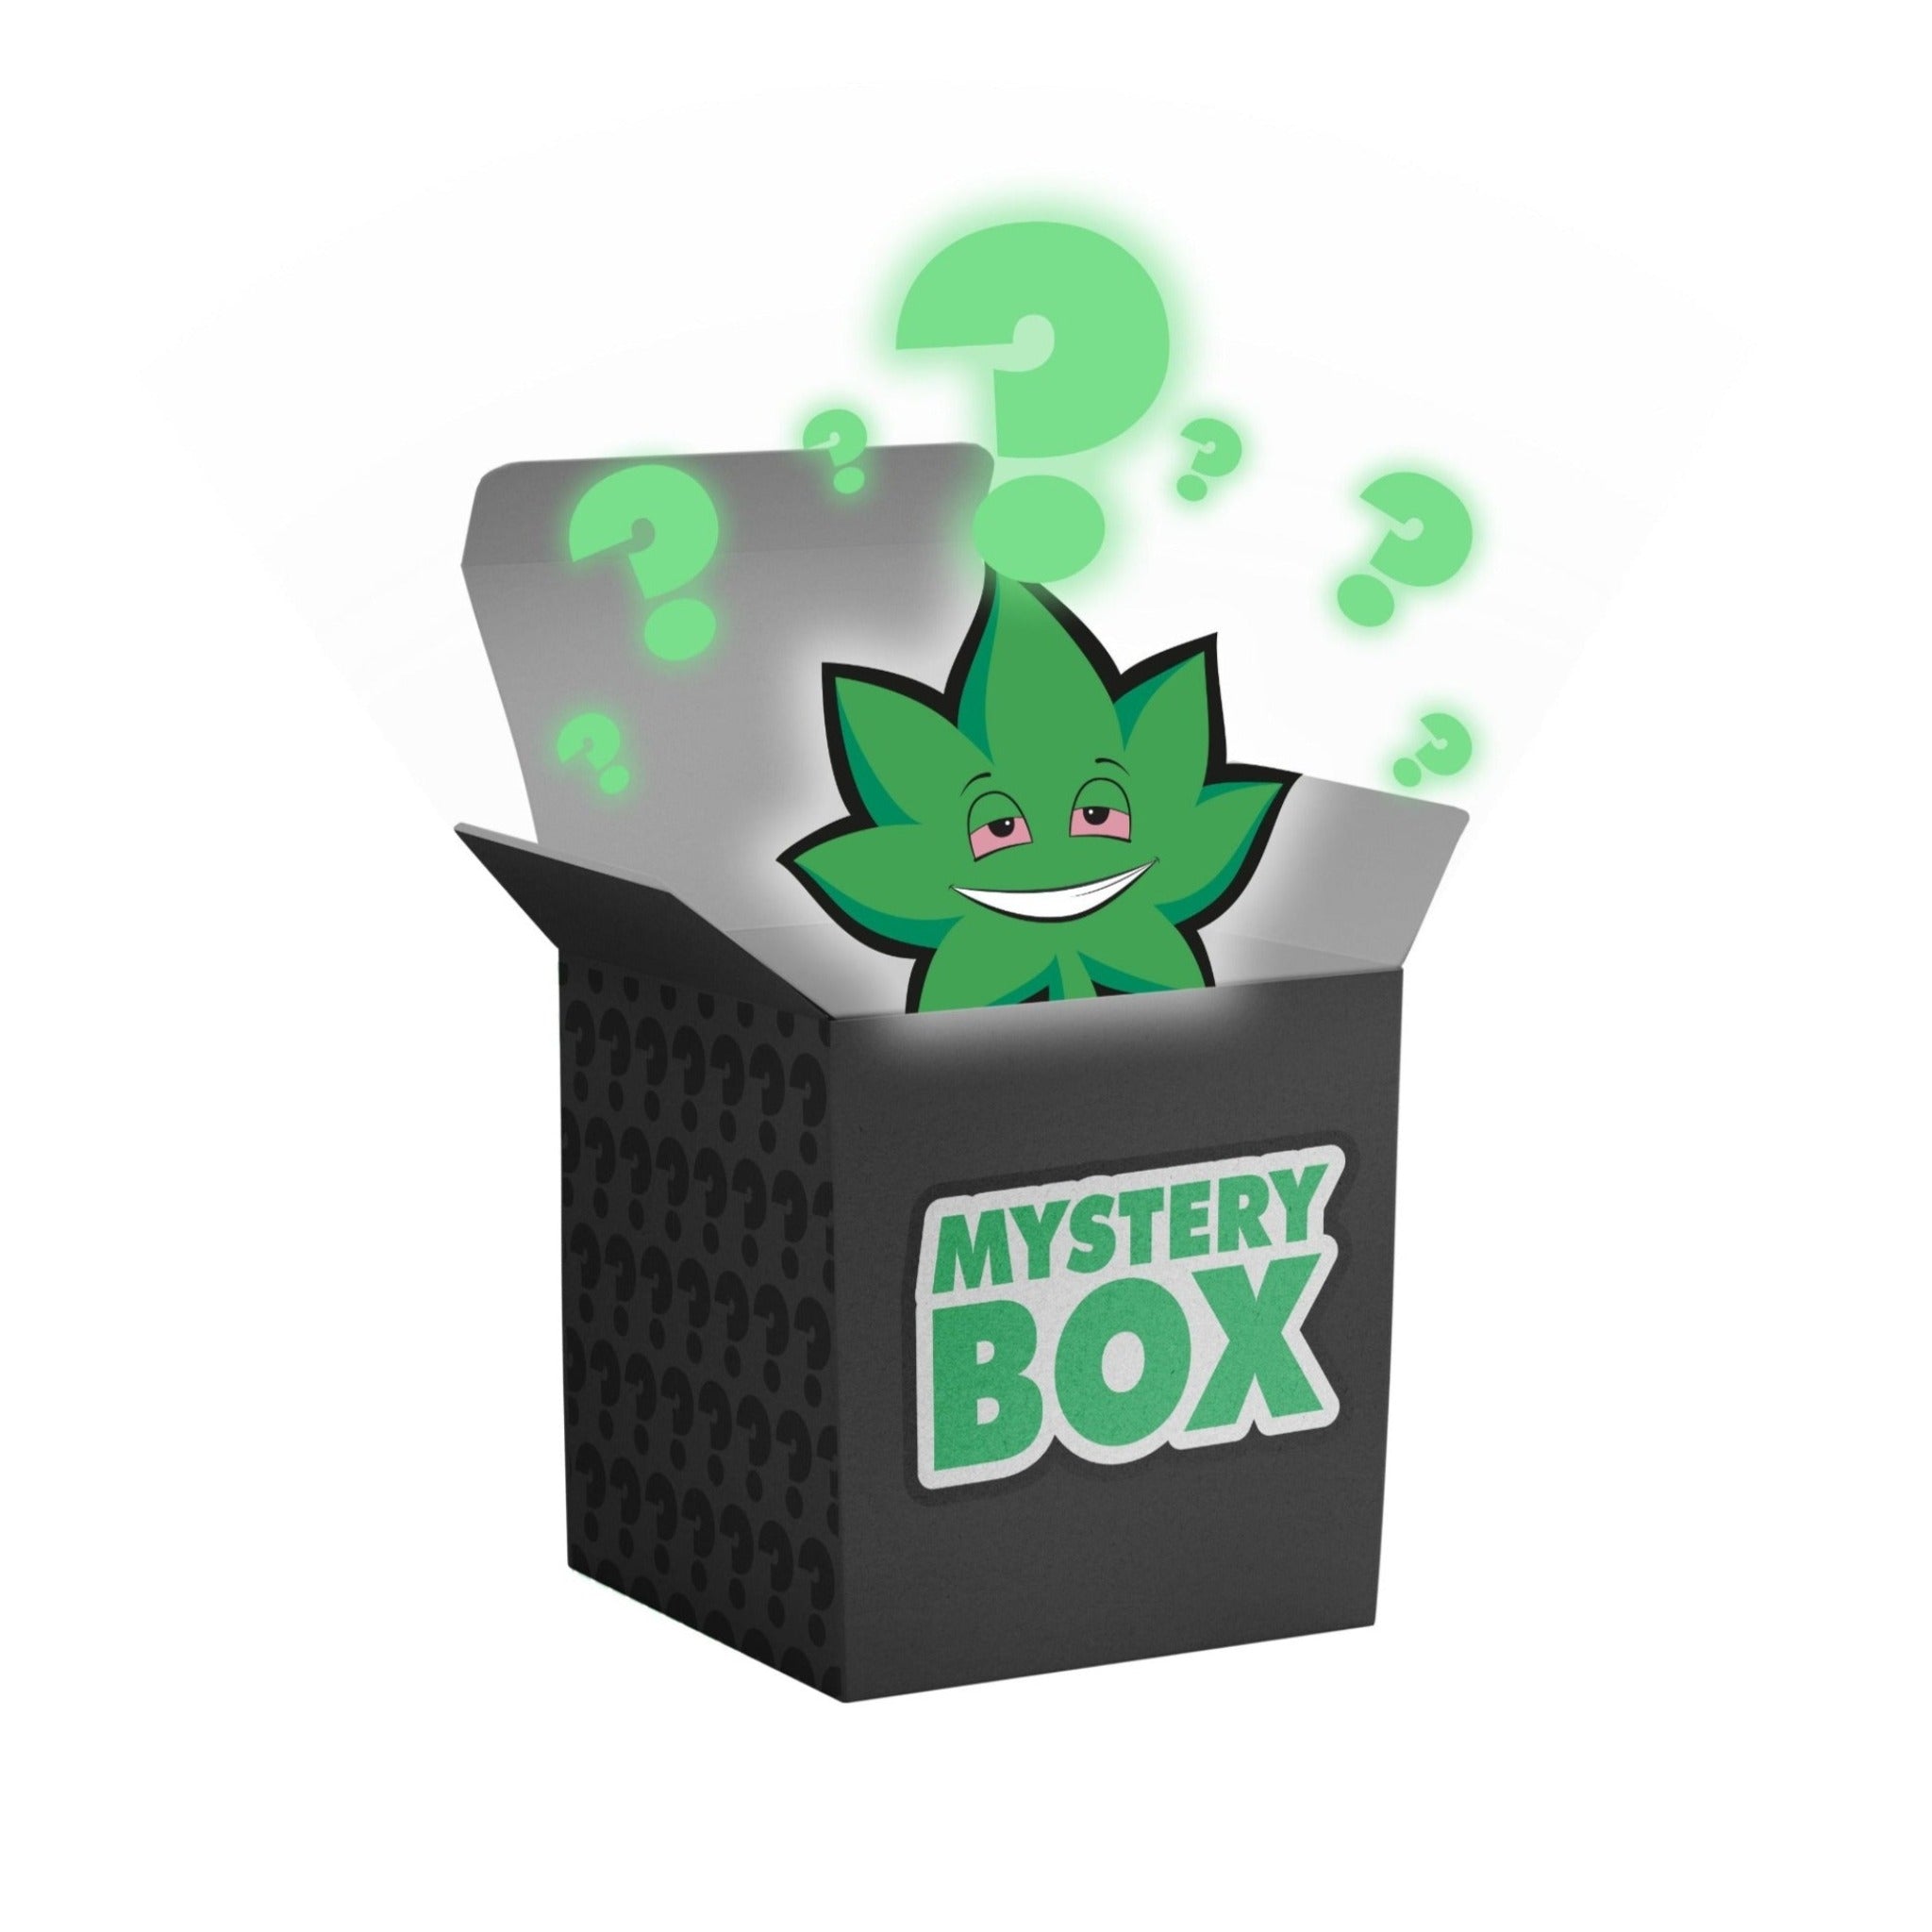 Electronics and Accessories Mystery Box — The Mystery Gift Shop